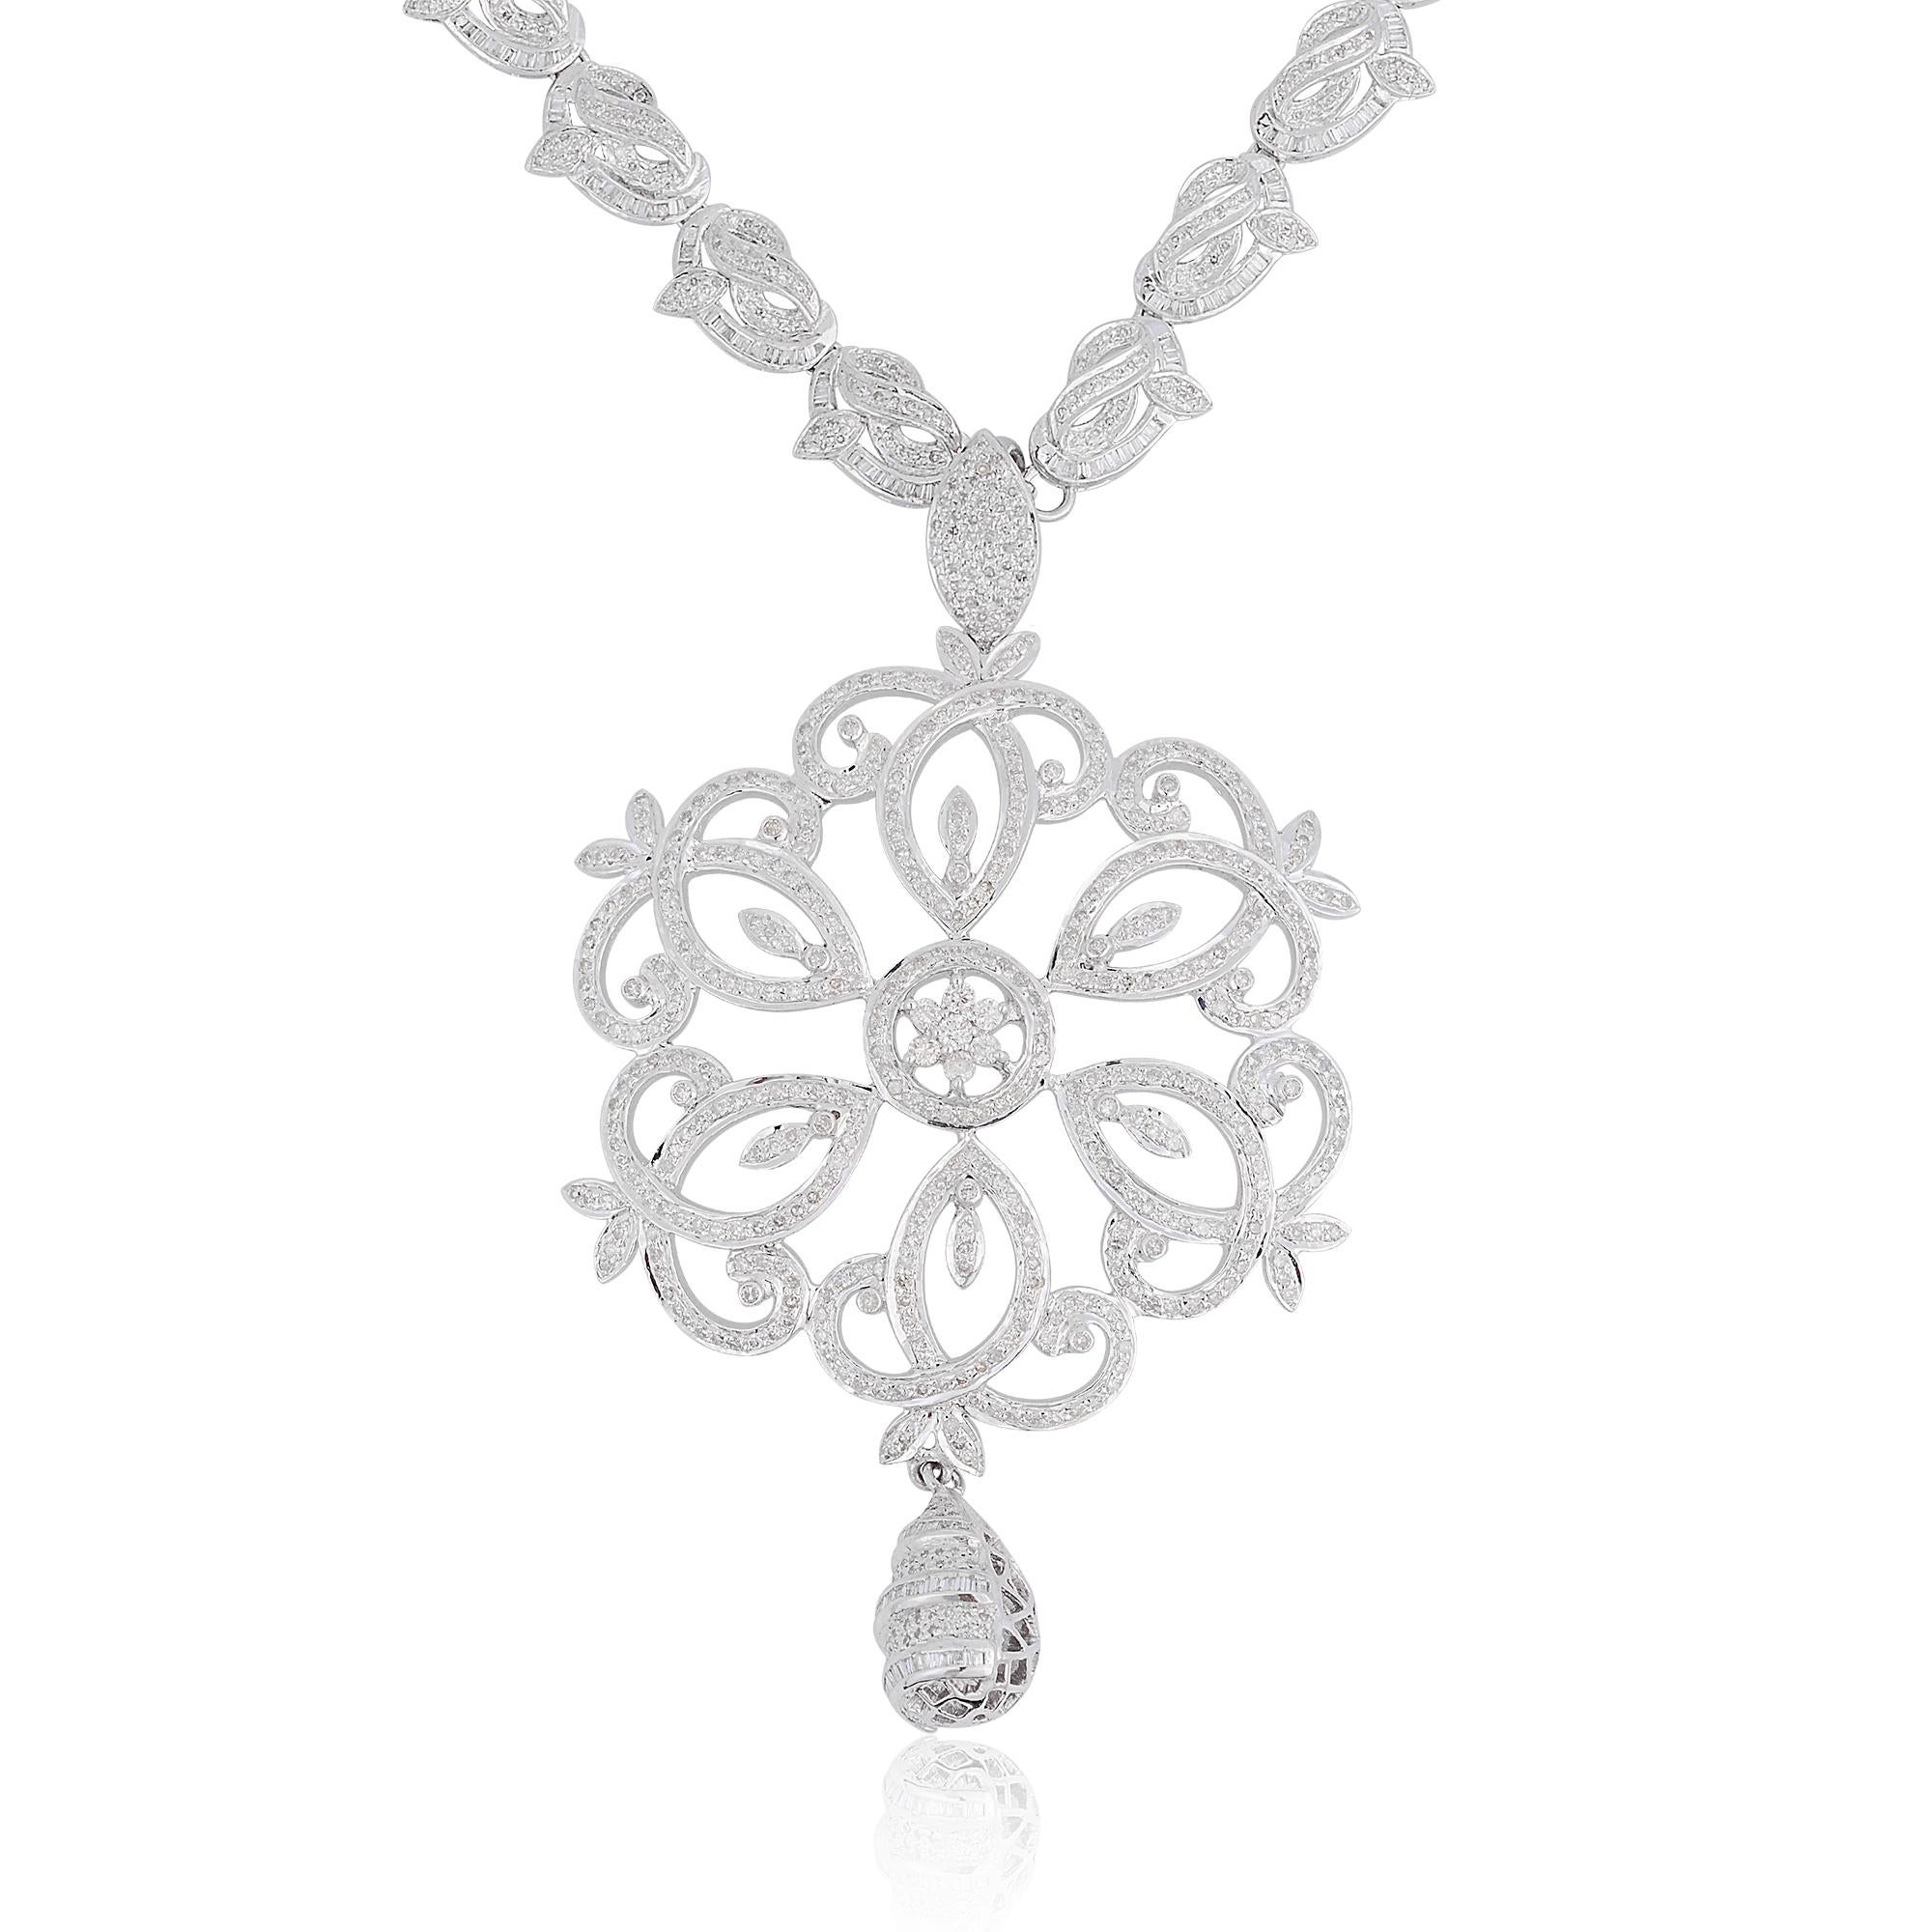 This breathtaking pendant necklace features a magnificent 12.80 carat natural diamond in a stunning flower design, adorned with a pave diamond setting. Crafted with silver, this piece of jewelry is a true testament to opulence and